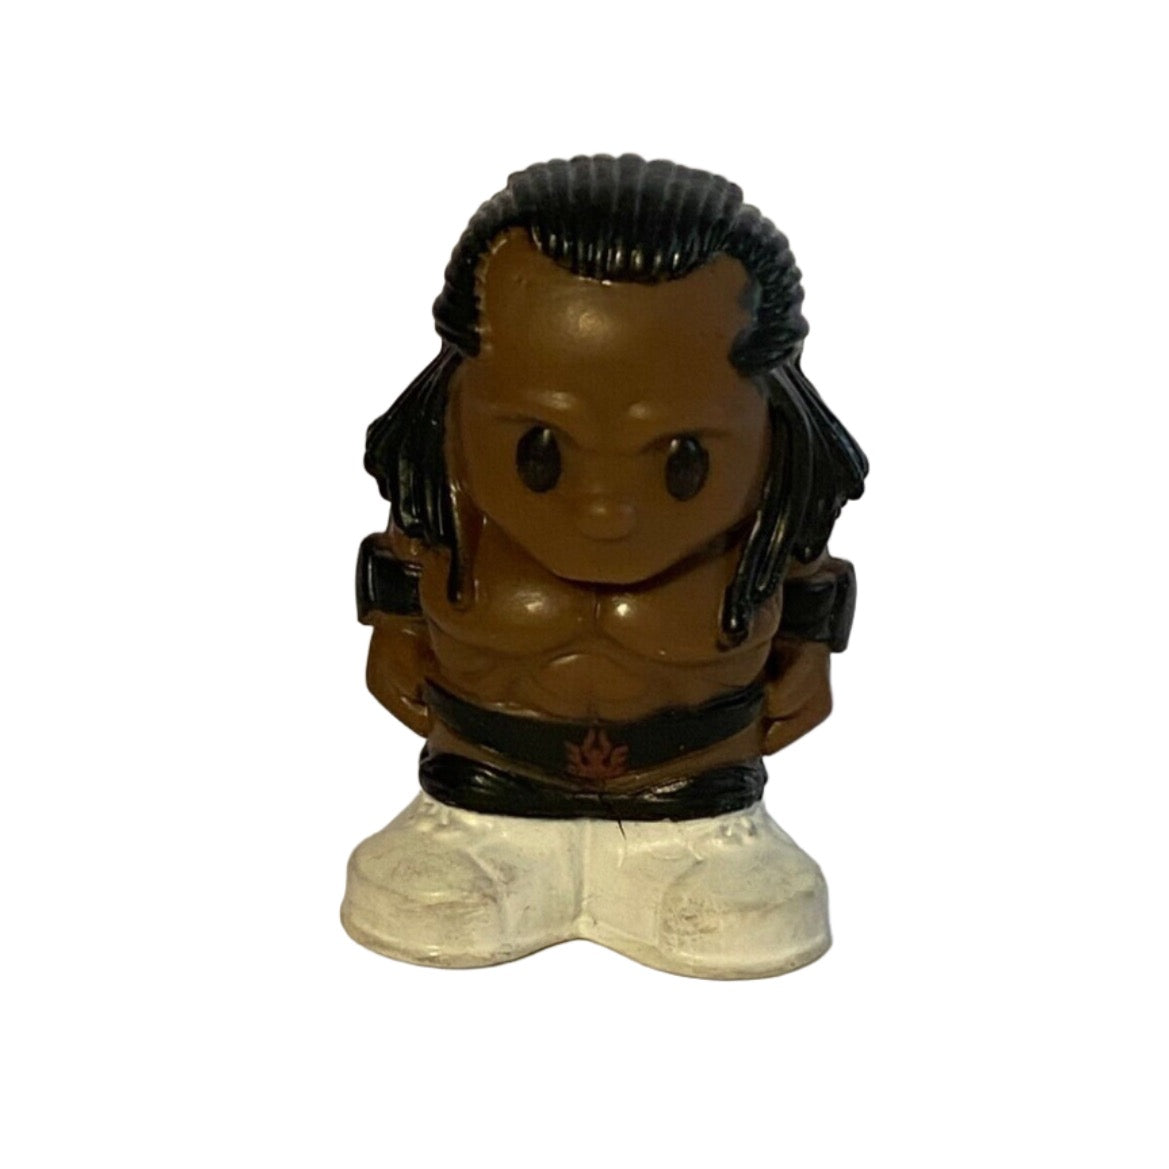 2017 WWE Headstart Ooshies Series 1 Pencil Topper Booker T [With Black Trunks]